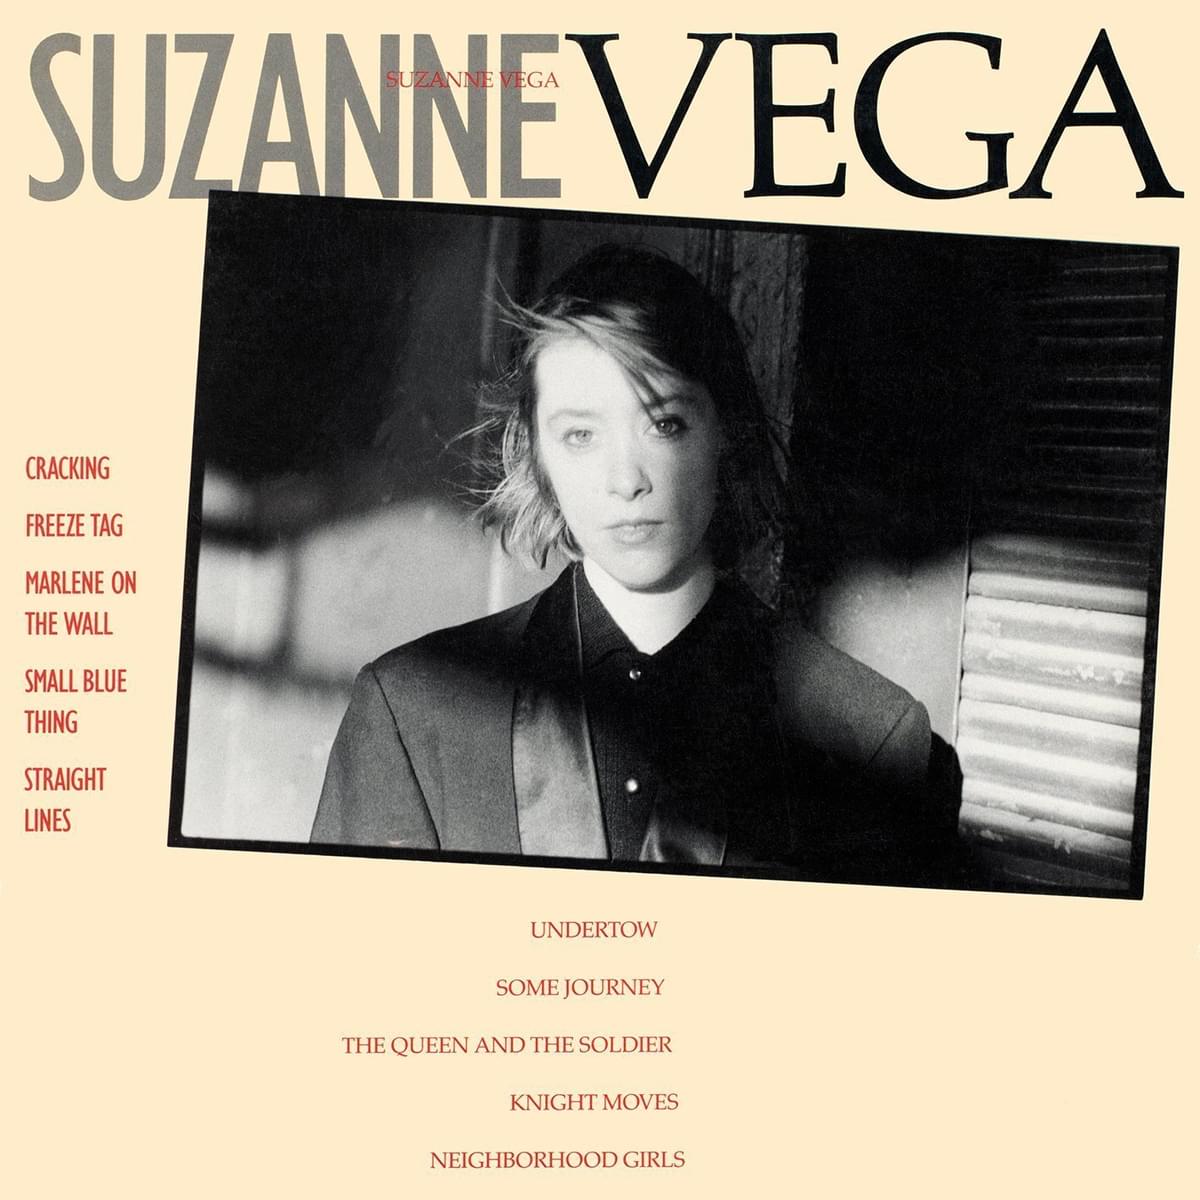 Cover of Suzanne Vegas 1985 self titled debut